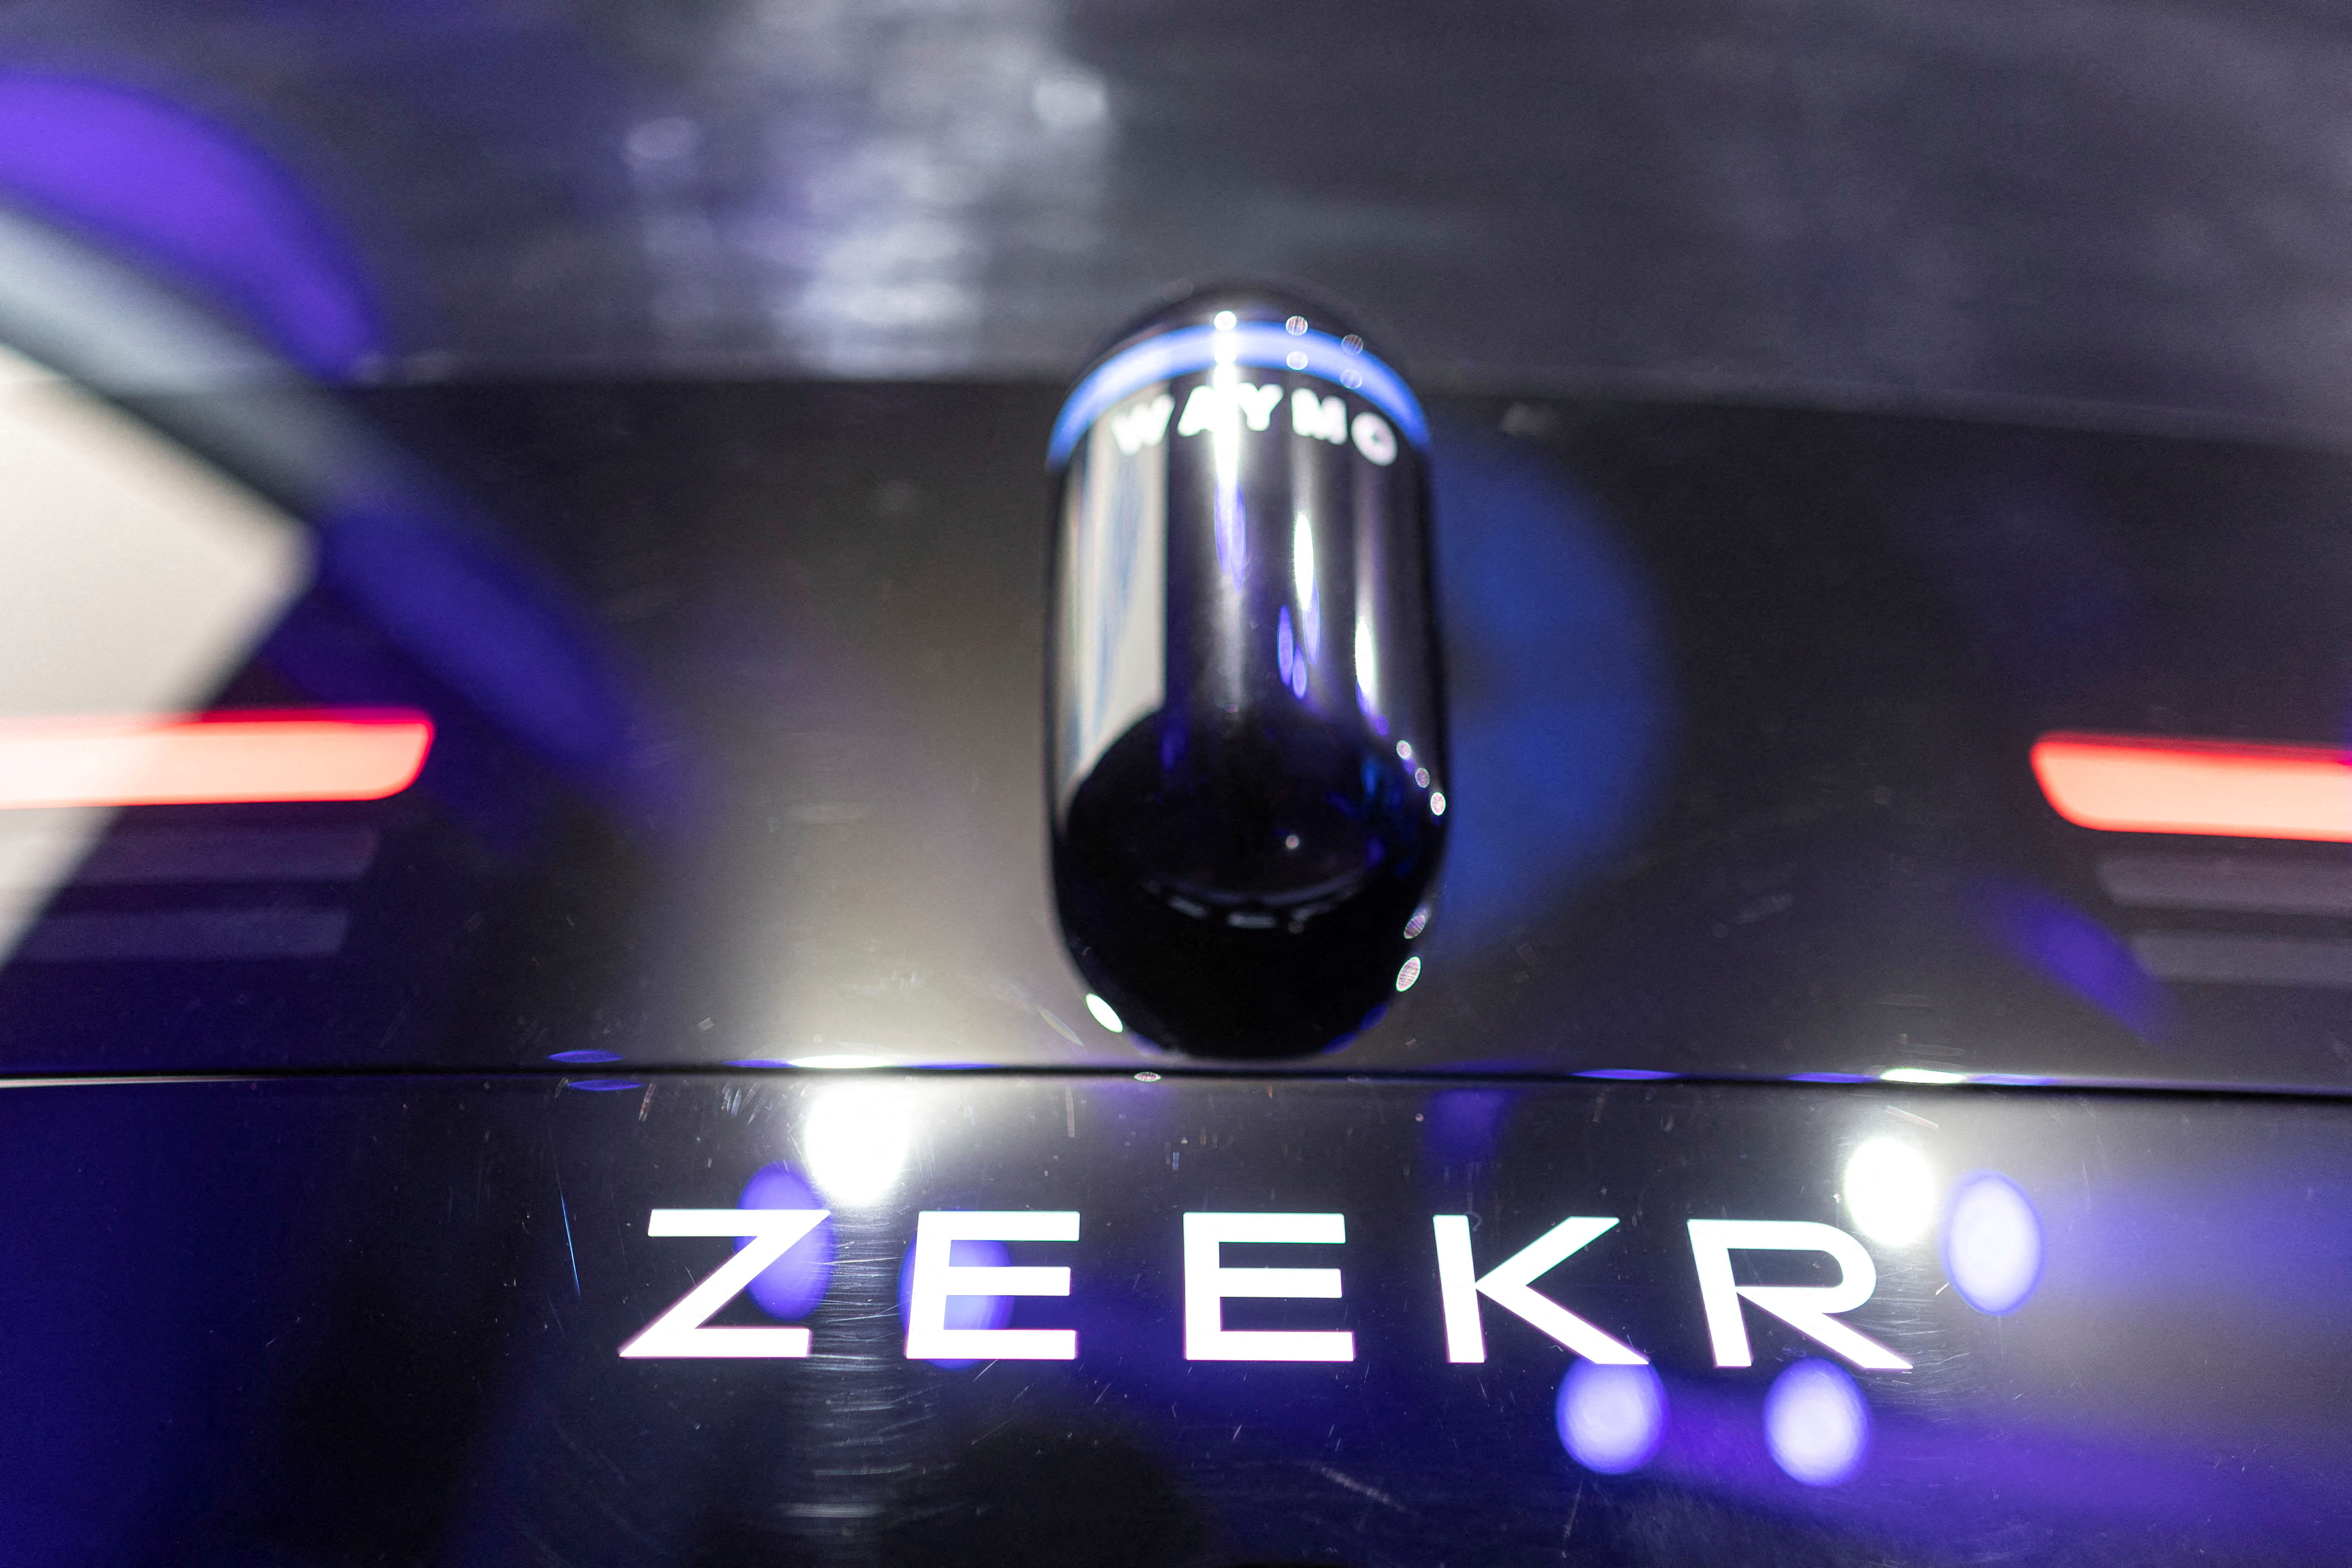 Zeekr, a self-driving ride-sharing vehicle by Waymo presented at the Los Angeles Auto Show